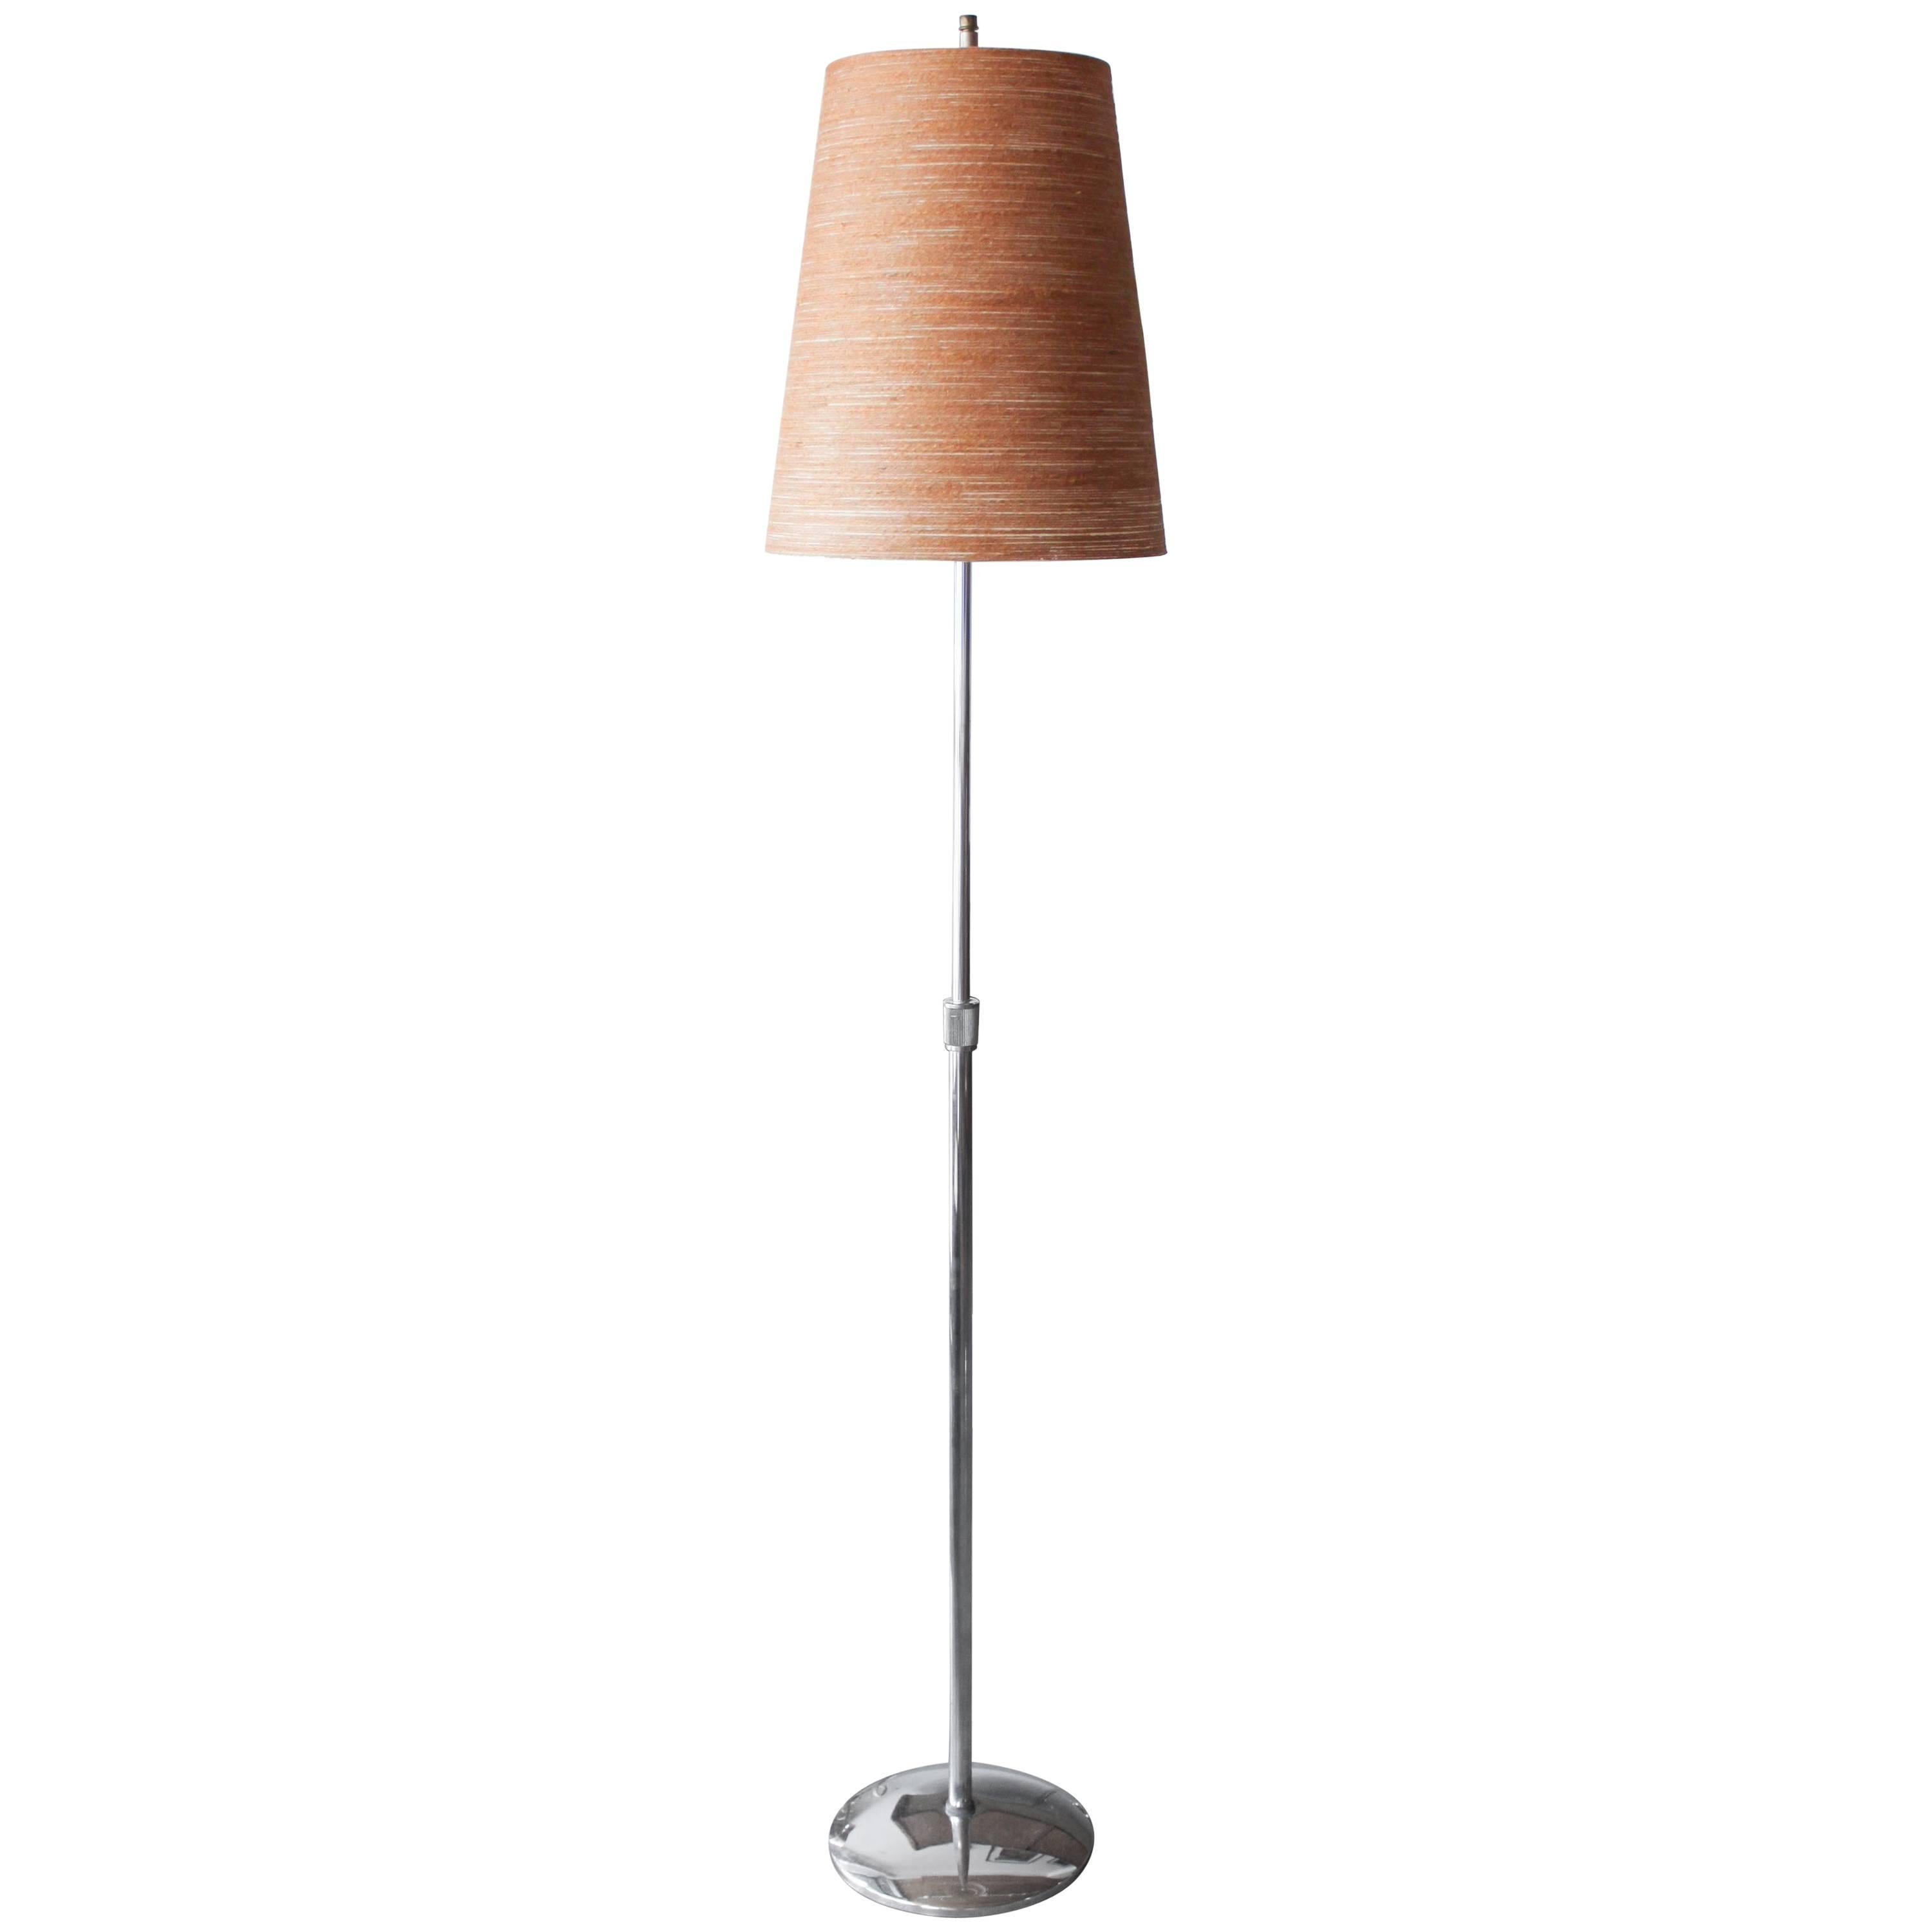 Bostlund Lotte Floor Lamp with Original Shade For Sale